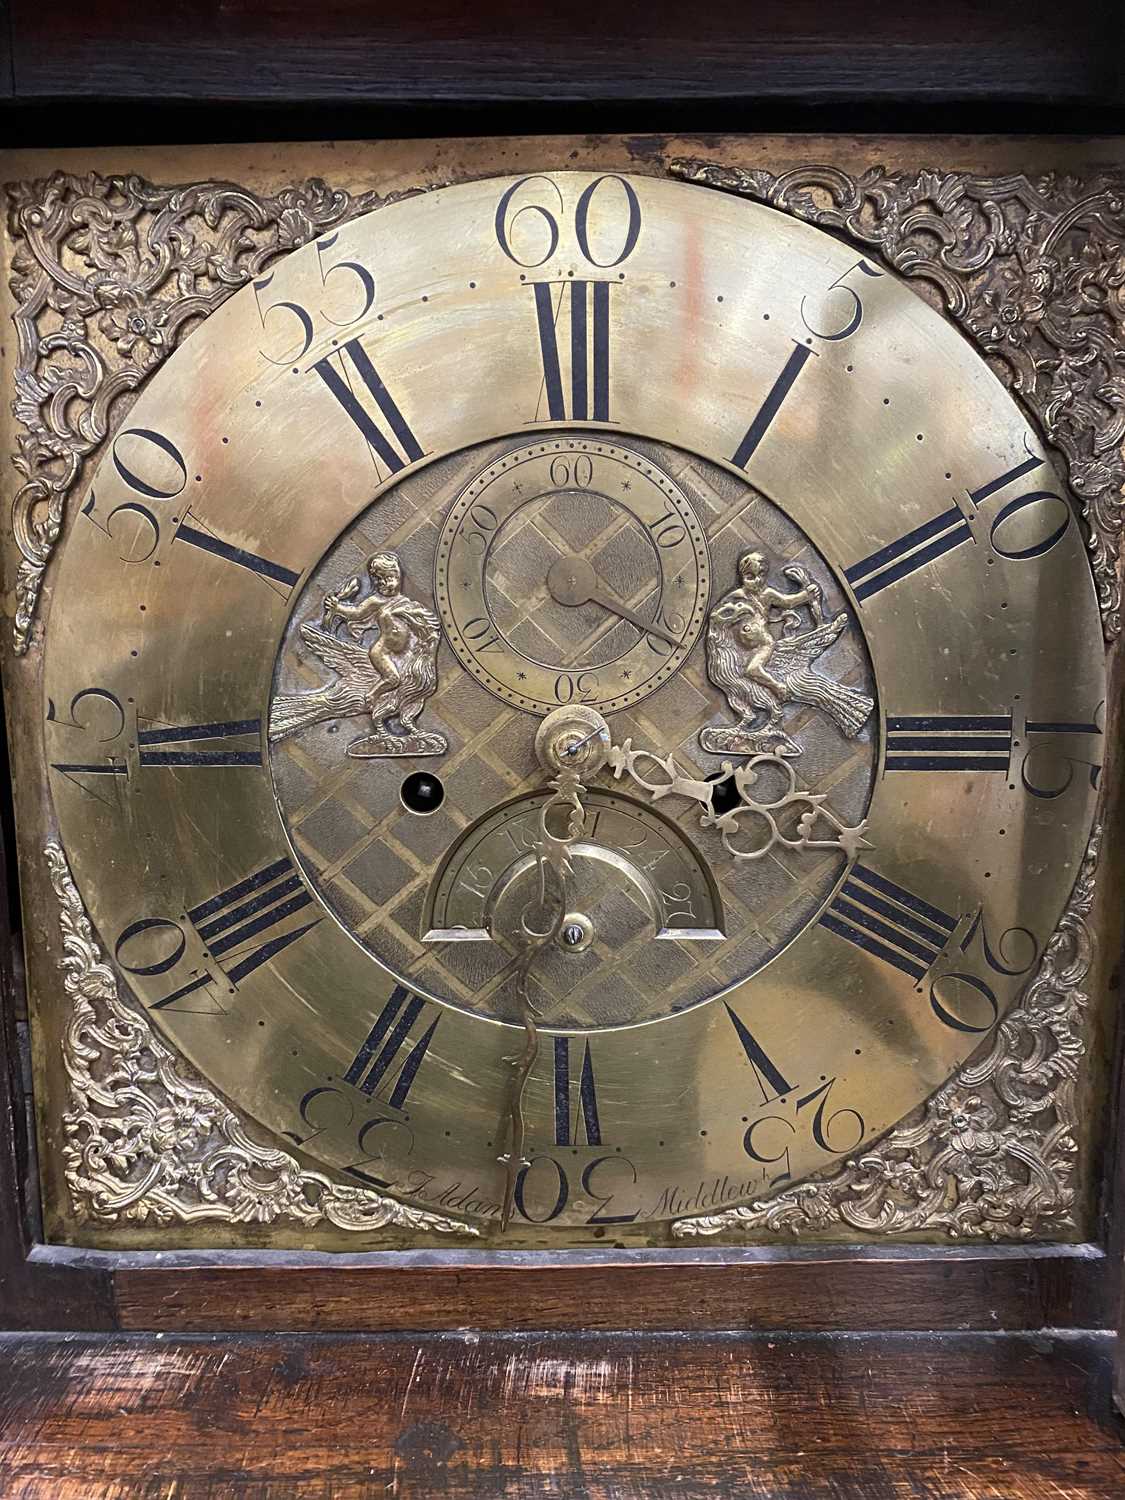 LATE 18TH / EARLY 19TH CENTURY LONGCASE CLOCK BY ADAMS, MIDDLEWICH, signed to the 12-inch square - Image 3 of 6